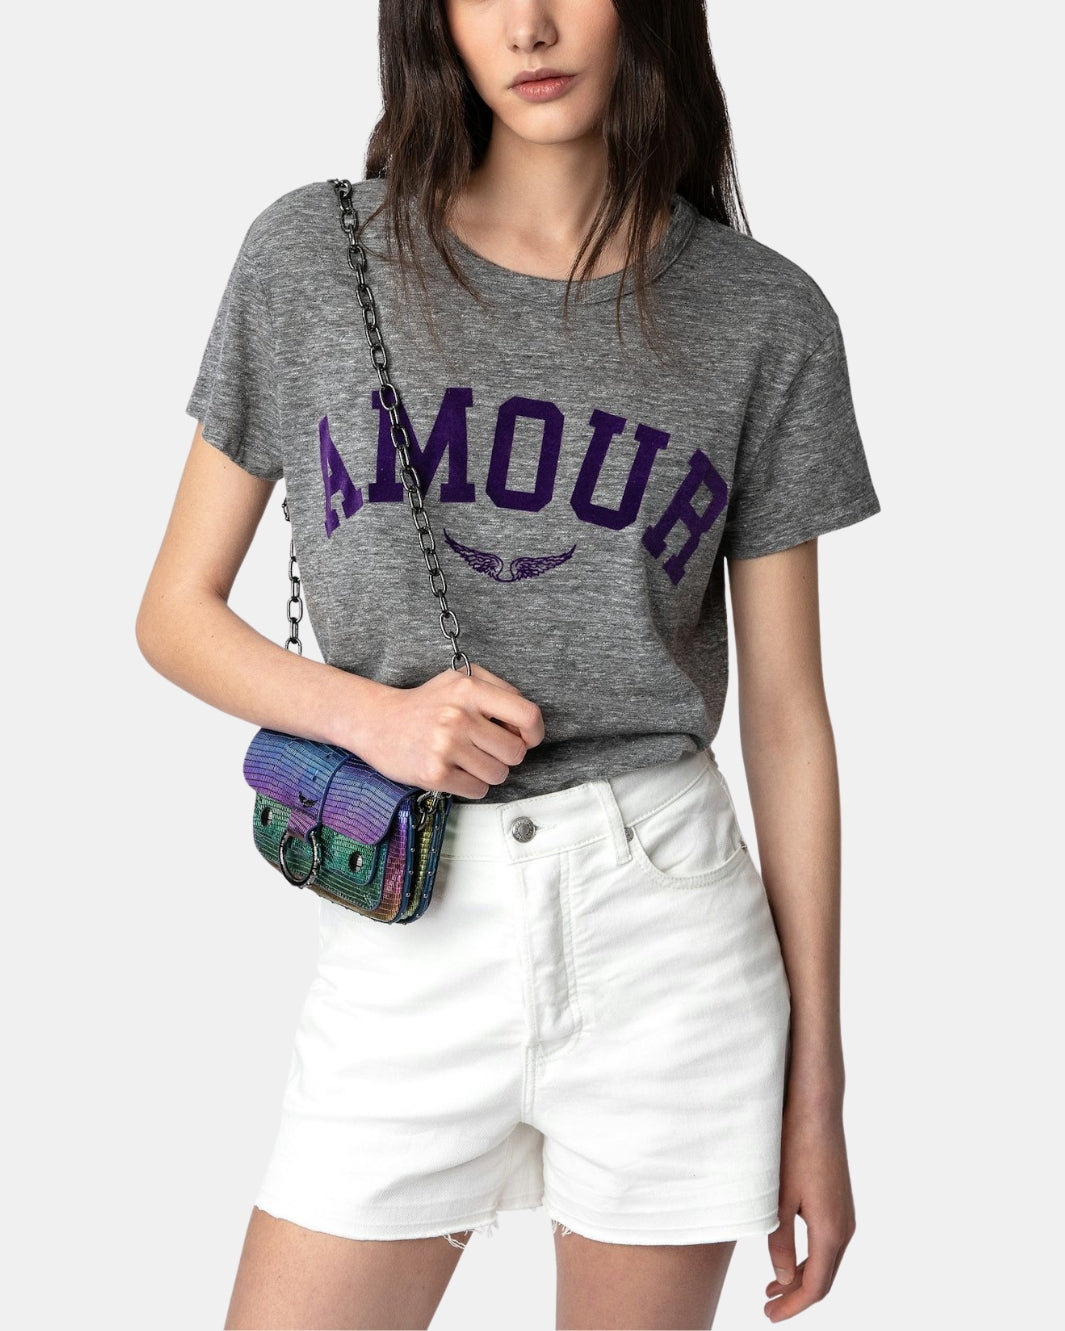 WALK AMOUR T-SHIRT IN GRIS CHINE - Romi Boutique